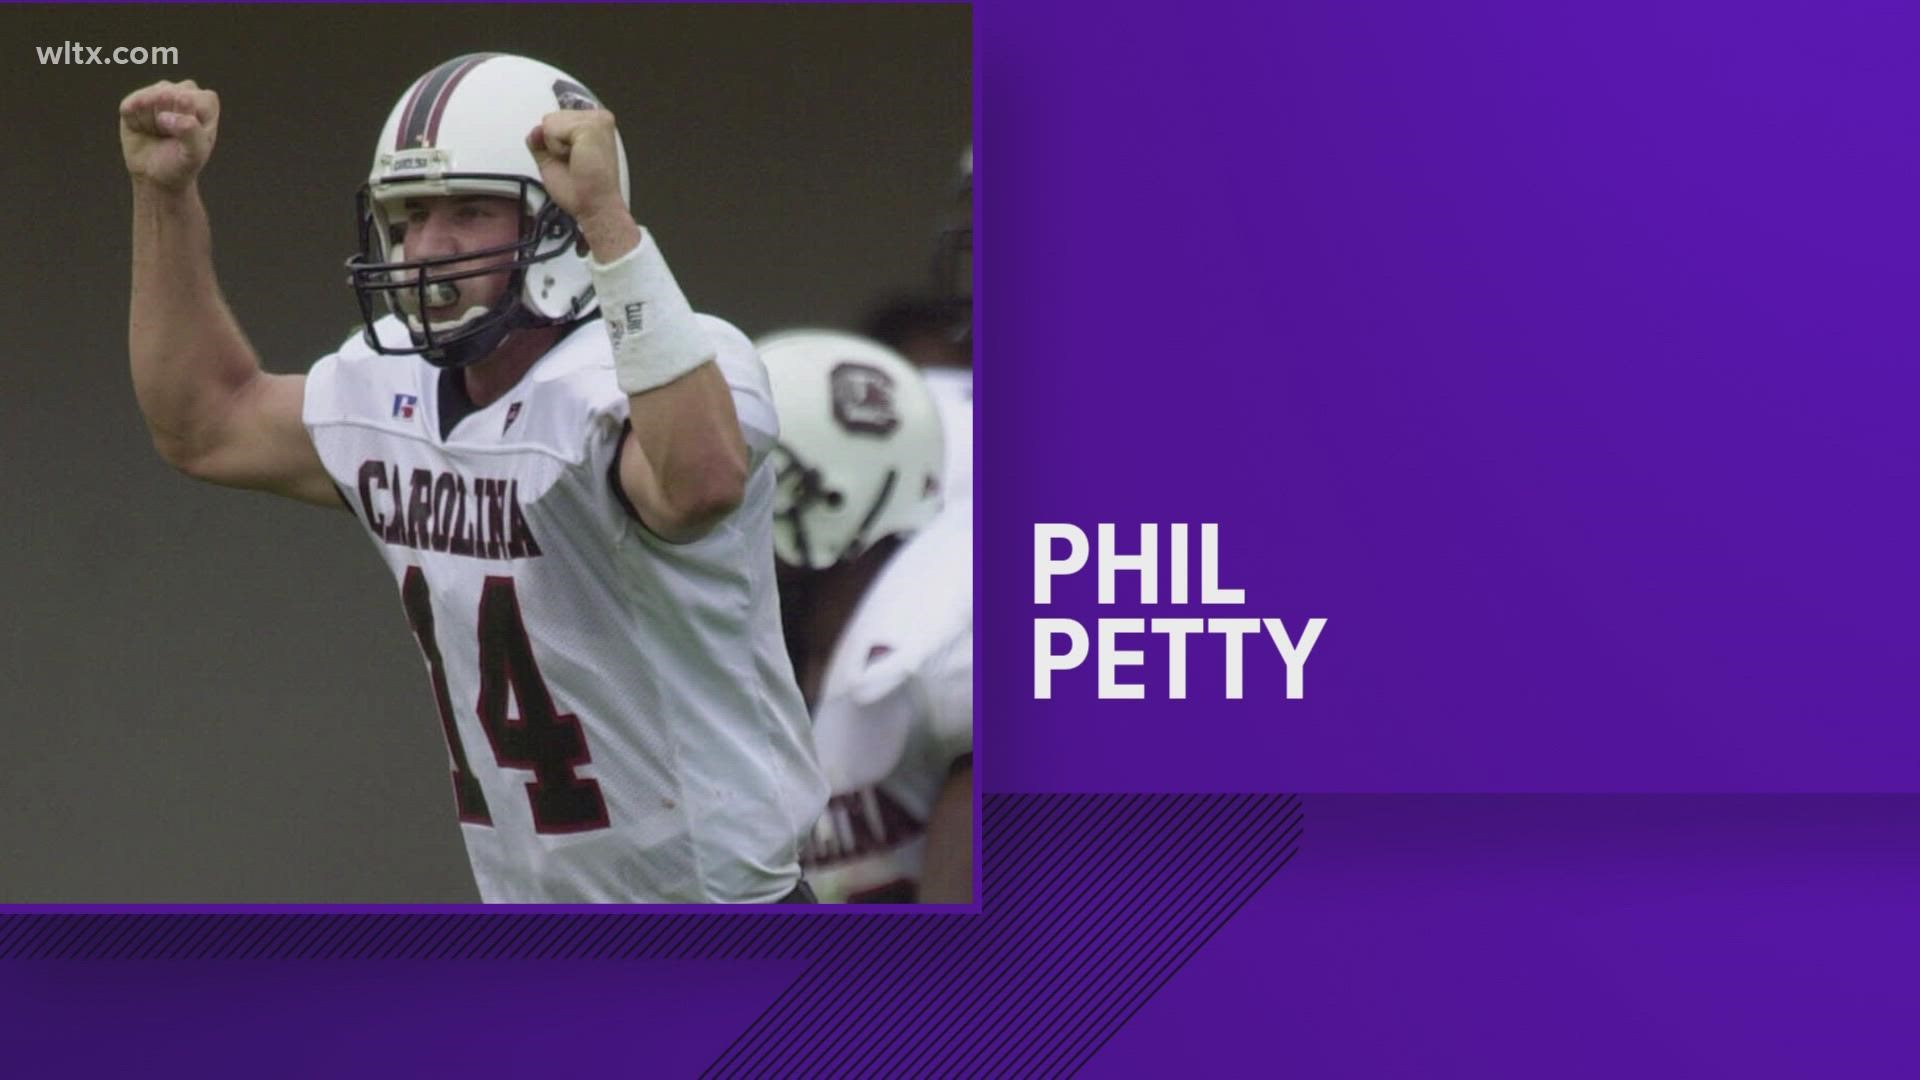 Former South Carolina Gamecock quarterback Phil Petty, who led the team to back-to-back bowl wins for the first time in school history, has died. He was 43.